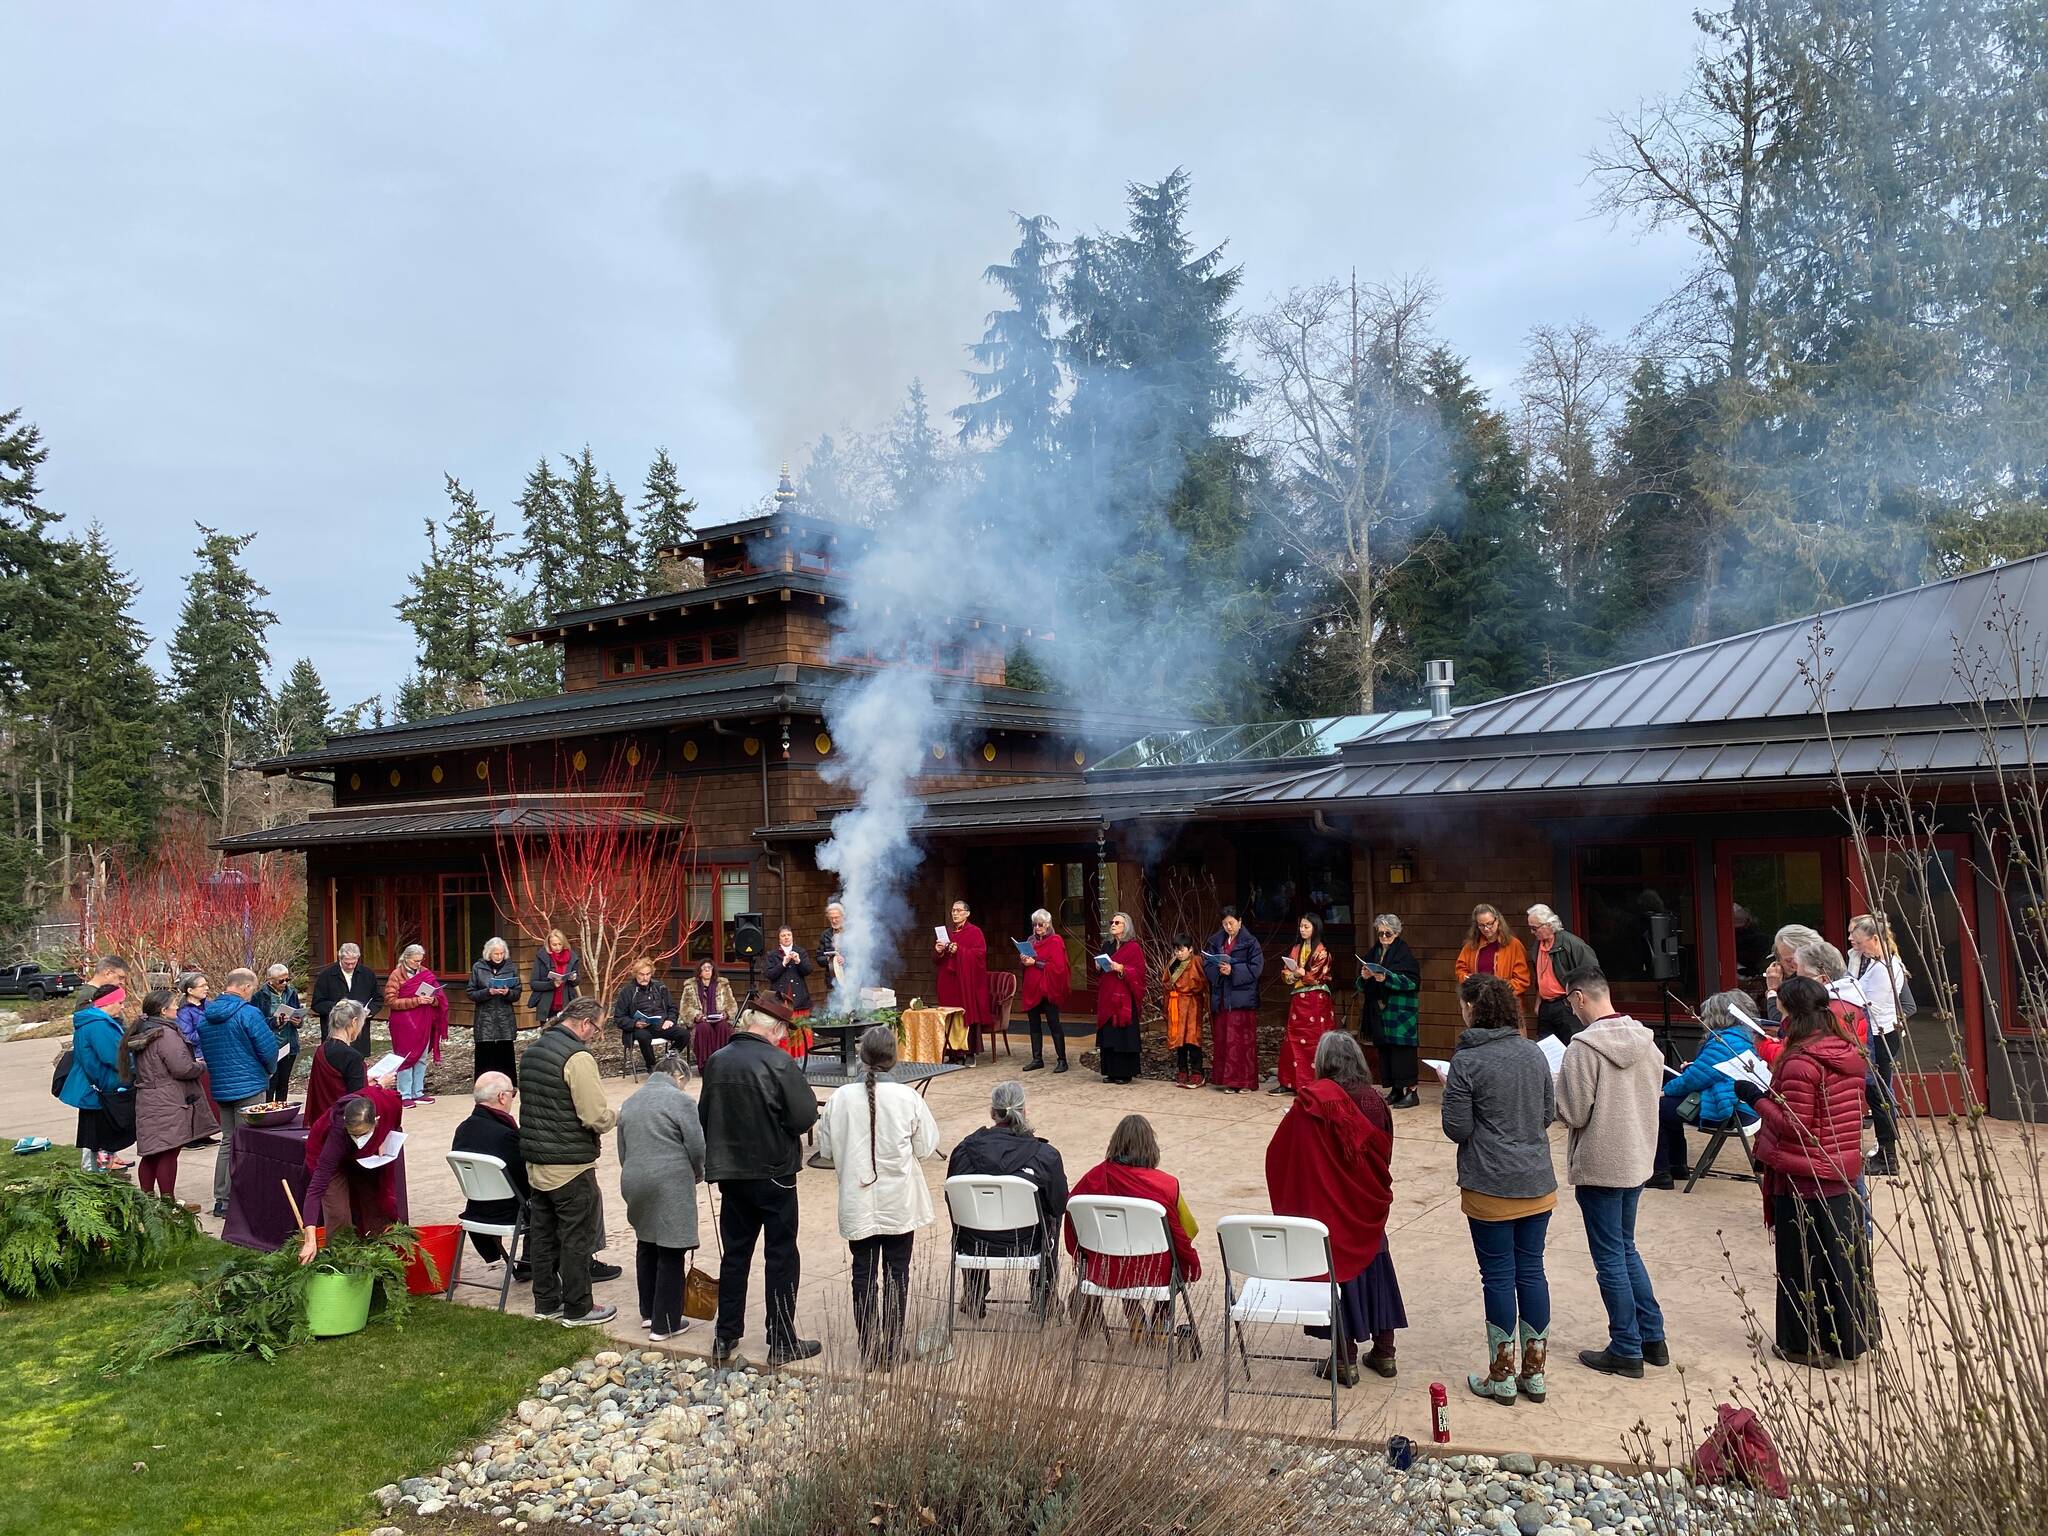 Whidbey Islanders partake in a fire offering ceremony for Losar, Tibetan New Year, earlier this month. (Photo courtesy of the Kilung Foundation)